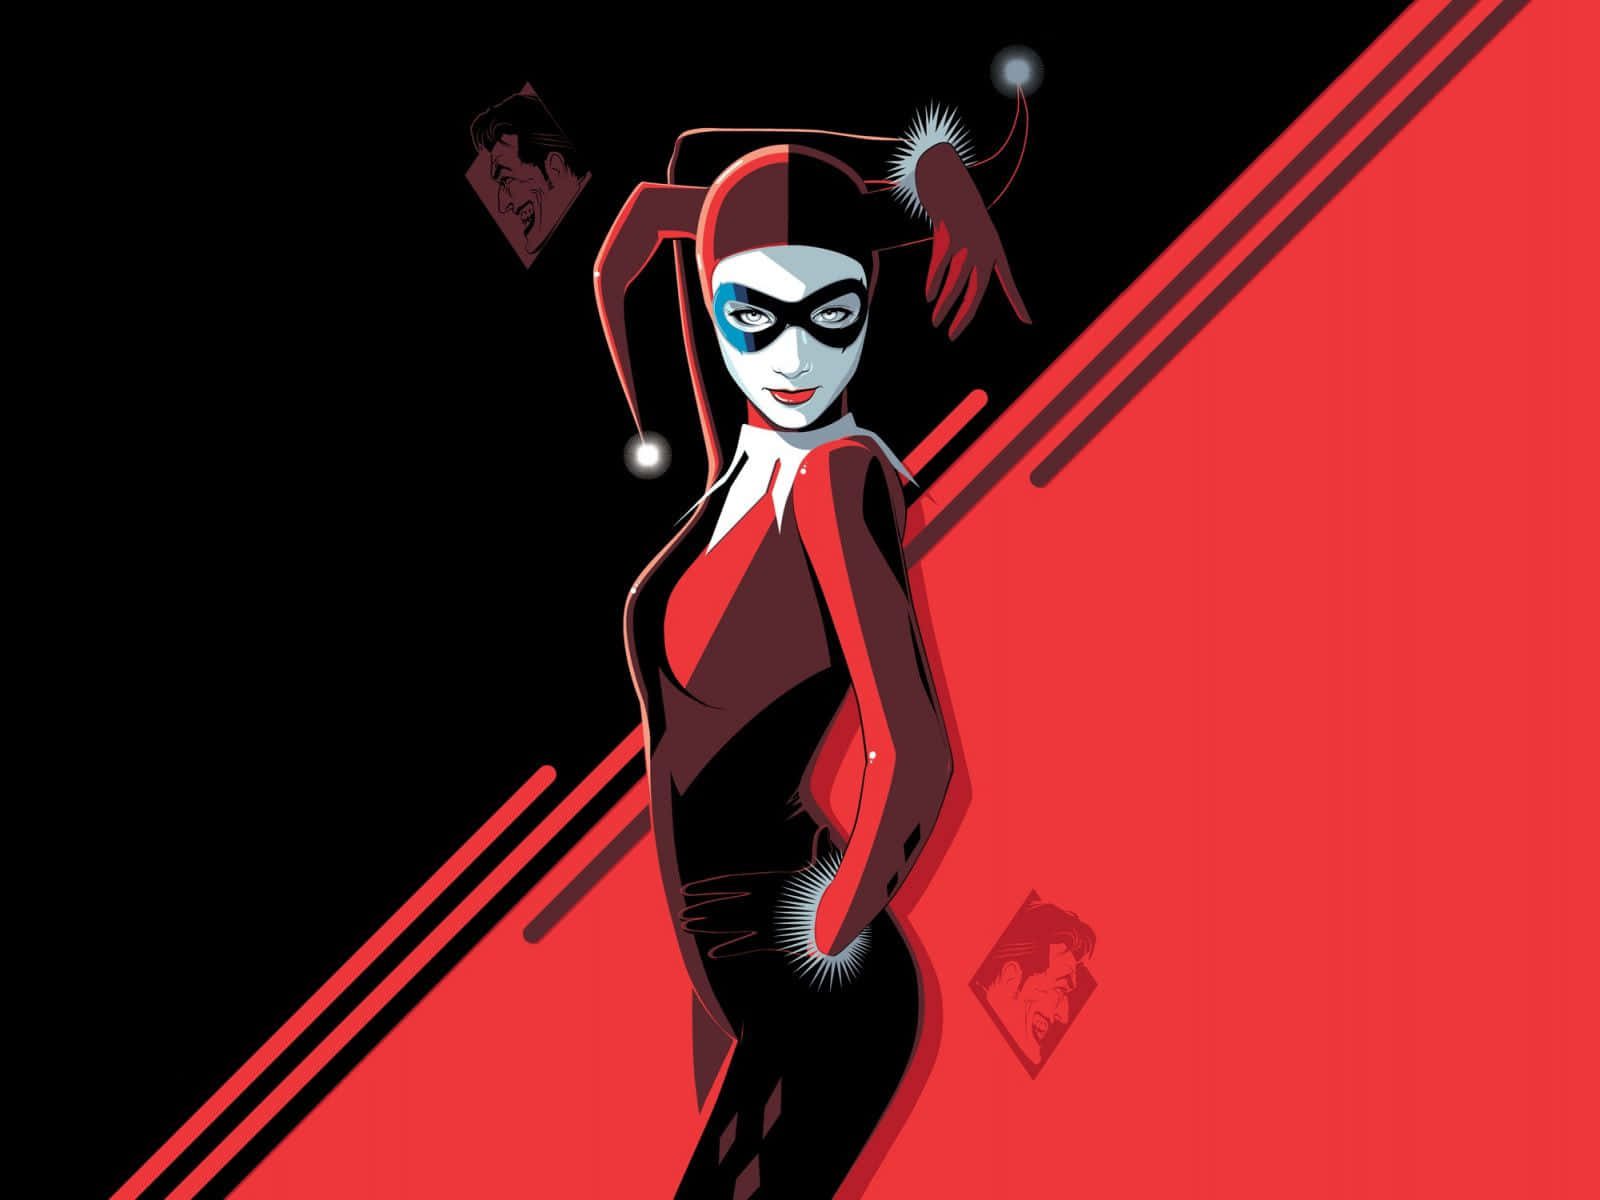 'Embrace Chaos with Original Harley Quinn' Wallpaper